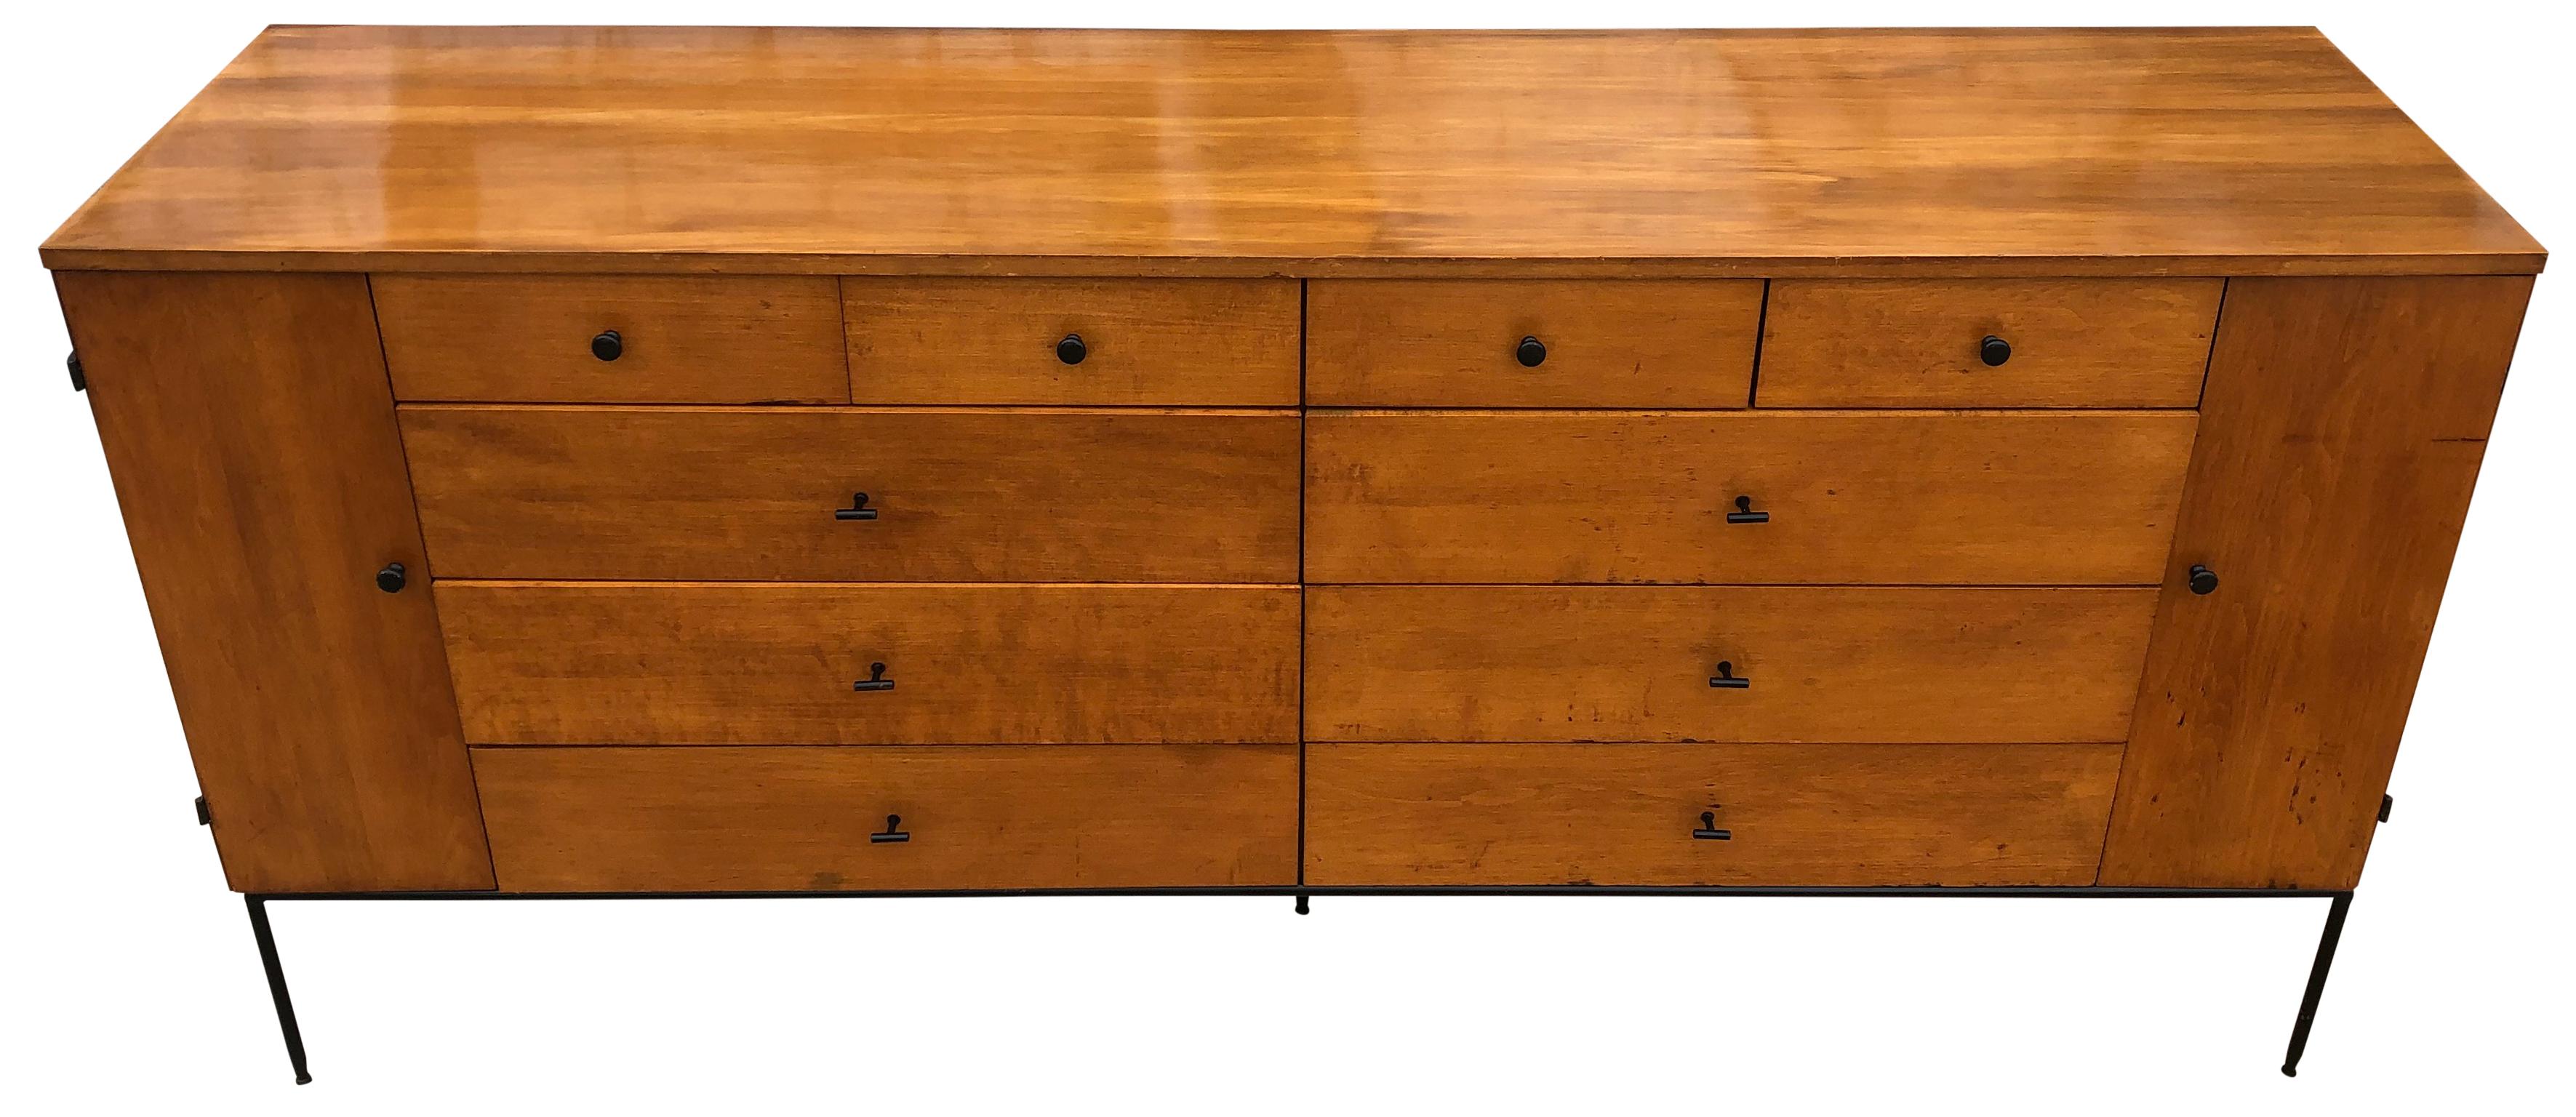 Midcentury American designer Paul McCobb Maple 20-drawer dresser #1510 Original medium blonde finish with steel T Pulls. Stunning original patina finish in vintage condition - Has original steel T Pulls on lower drawers along with 6 round knobs and